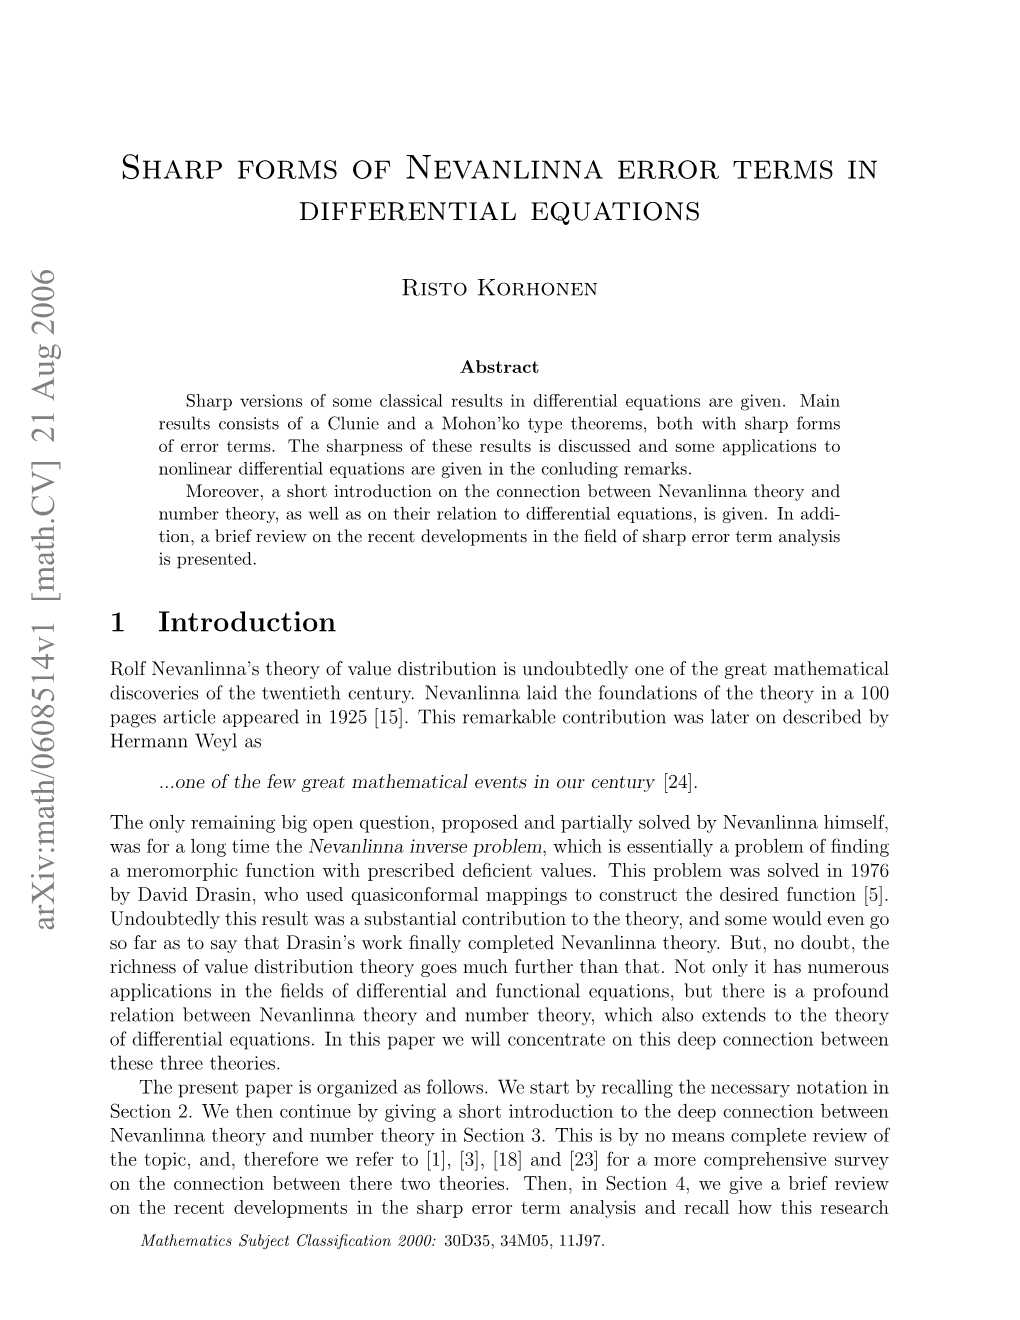 Sharp Forms of Nevanlinna Error Terms in Differential Equations